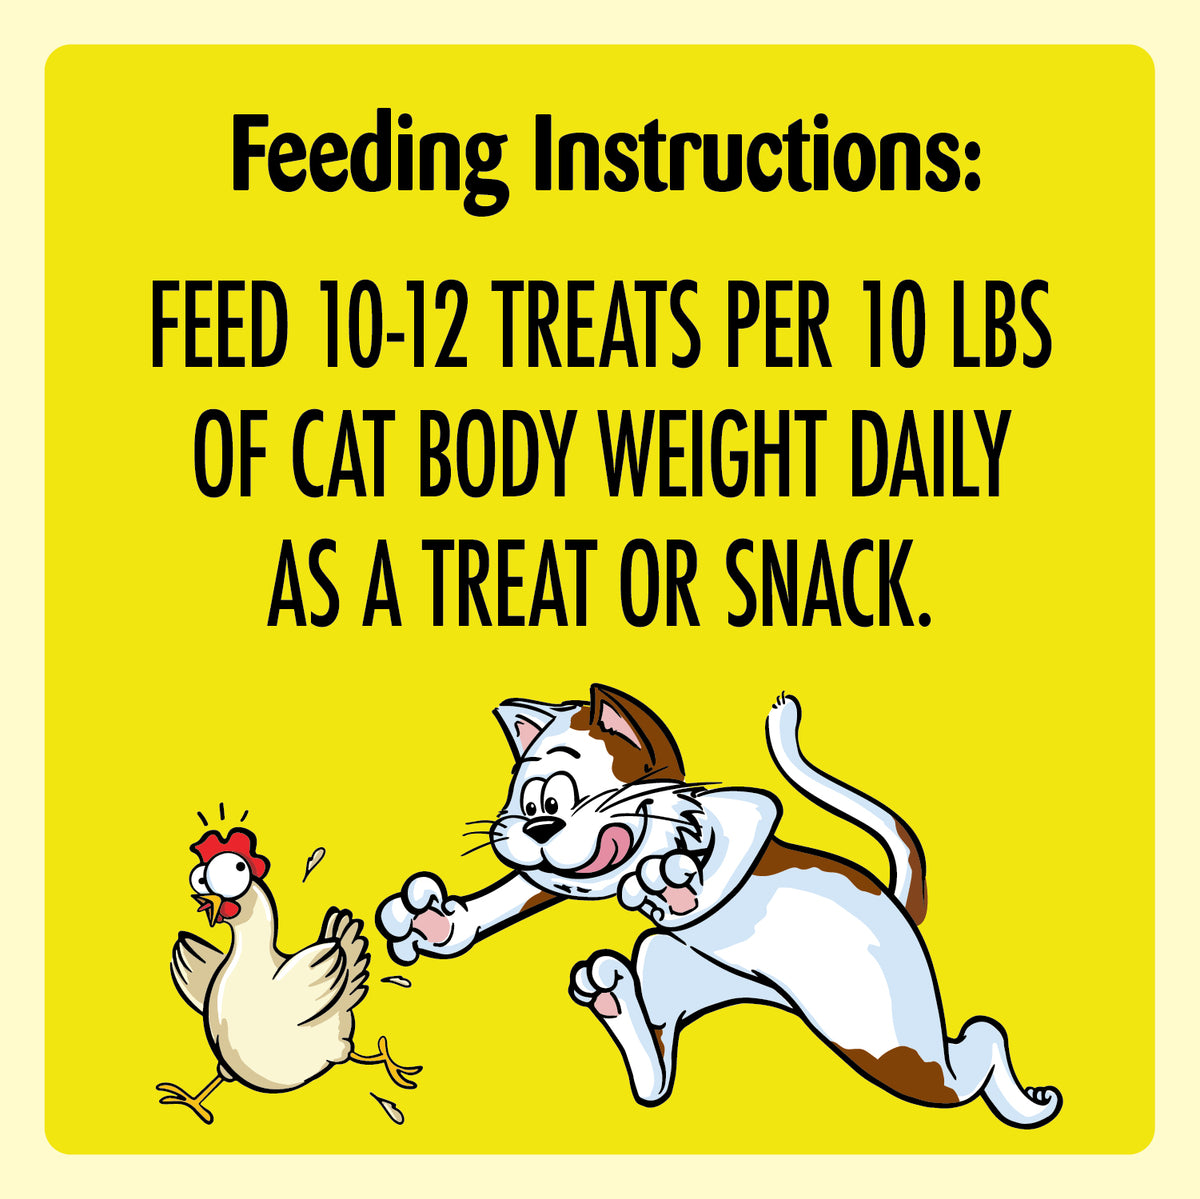 [Temptations][TEMPTATIONS Meaty Bites, Soft and Savory Cat Treats, Chicken Flavor, 4.1 oz. Pouch][Feeding Guidelines Image]